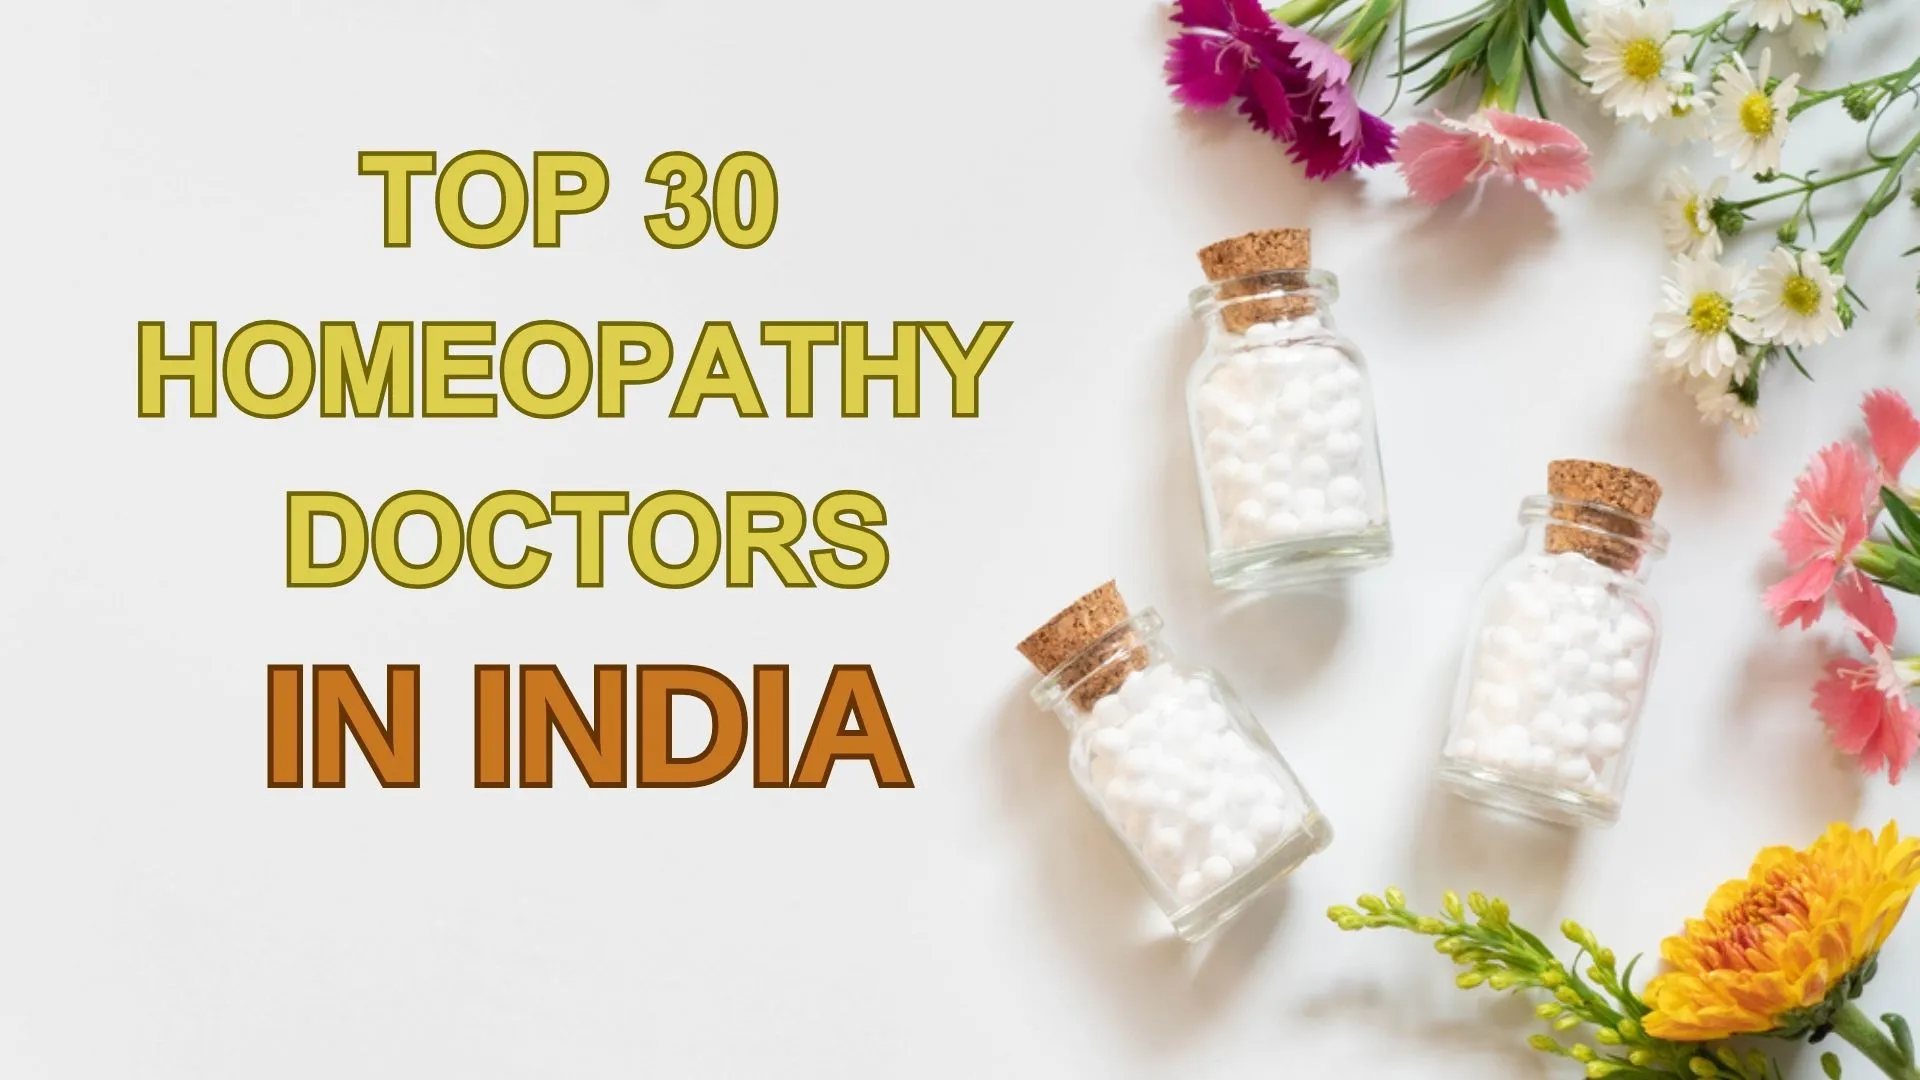 Top 30 Homeopathy Doctors in India for Holistic Wellness